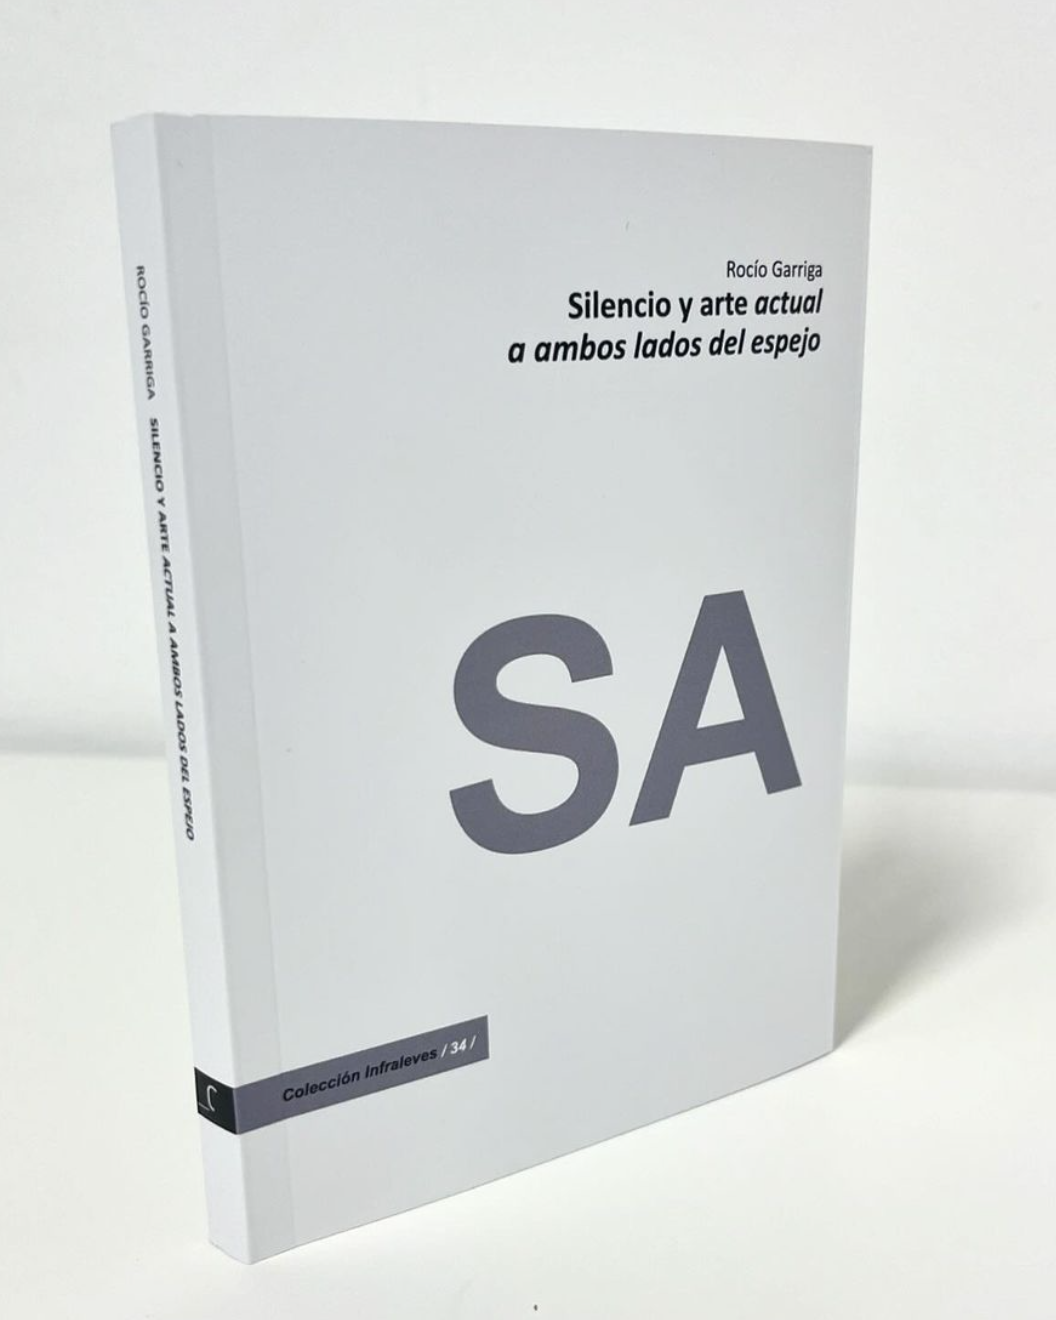 >CENDEAC publishes Rocio Garriga's book "Silence and contemporary art: on the other side of the mirror"